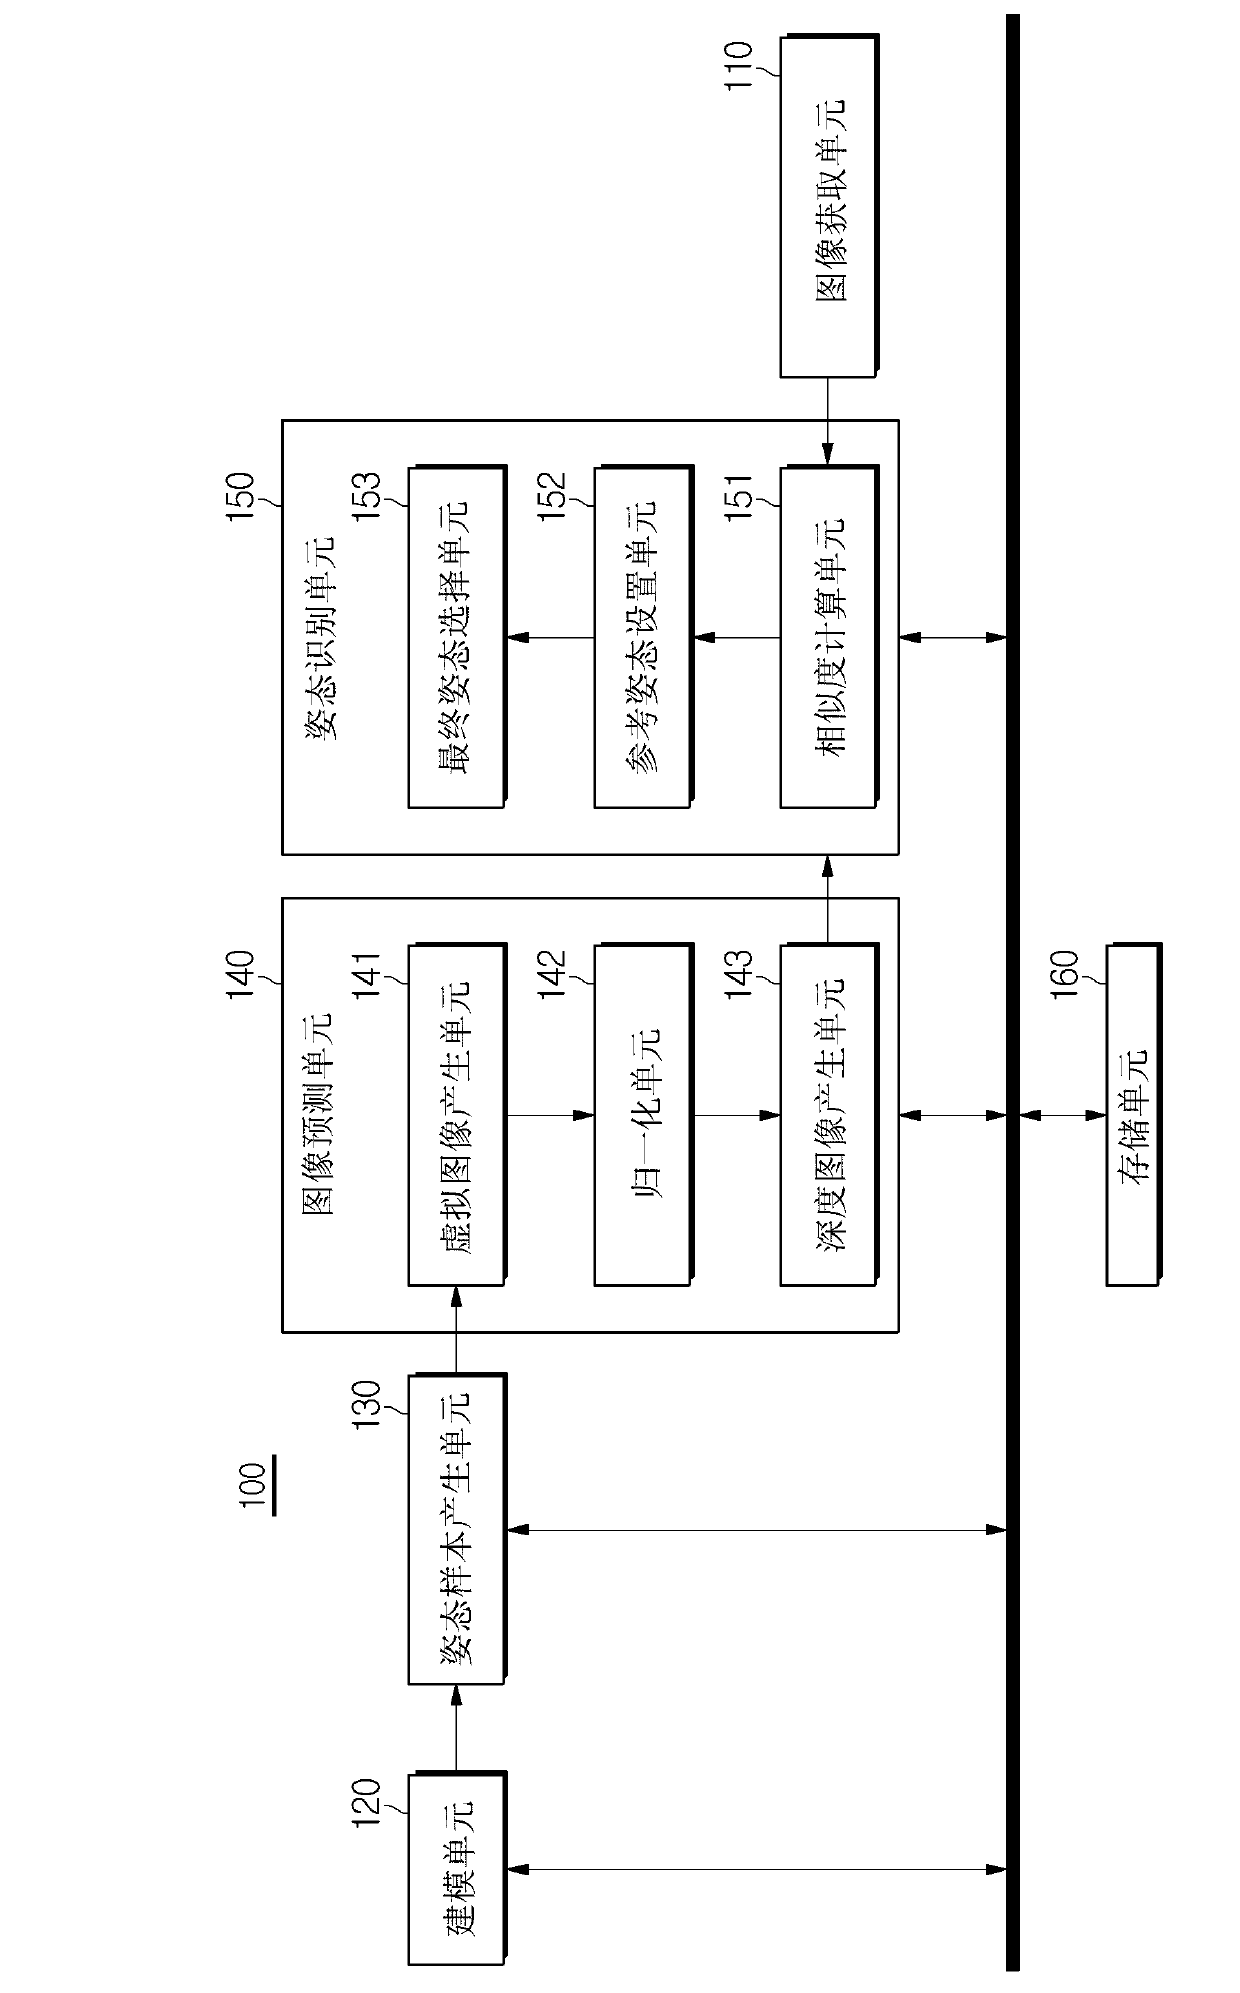 Method and apparatus for pose recognition